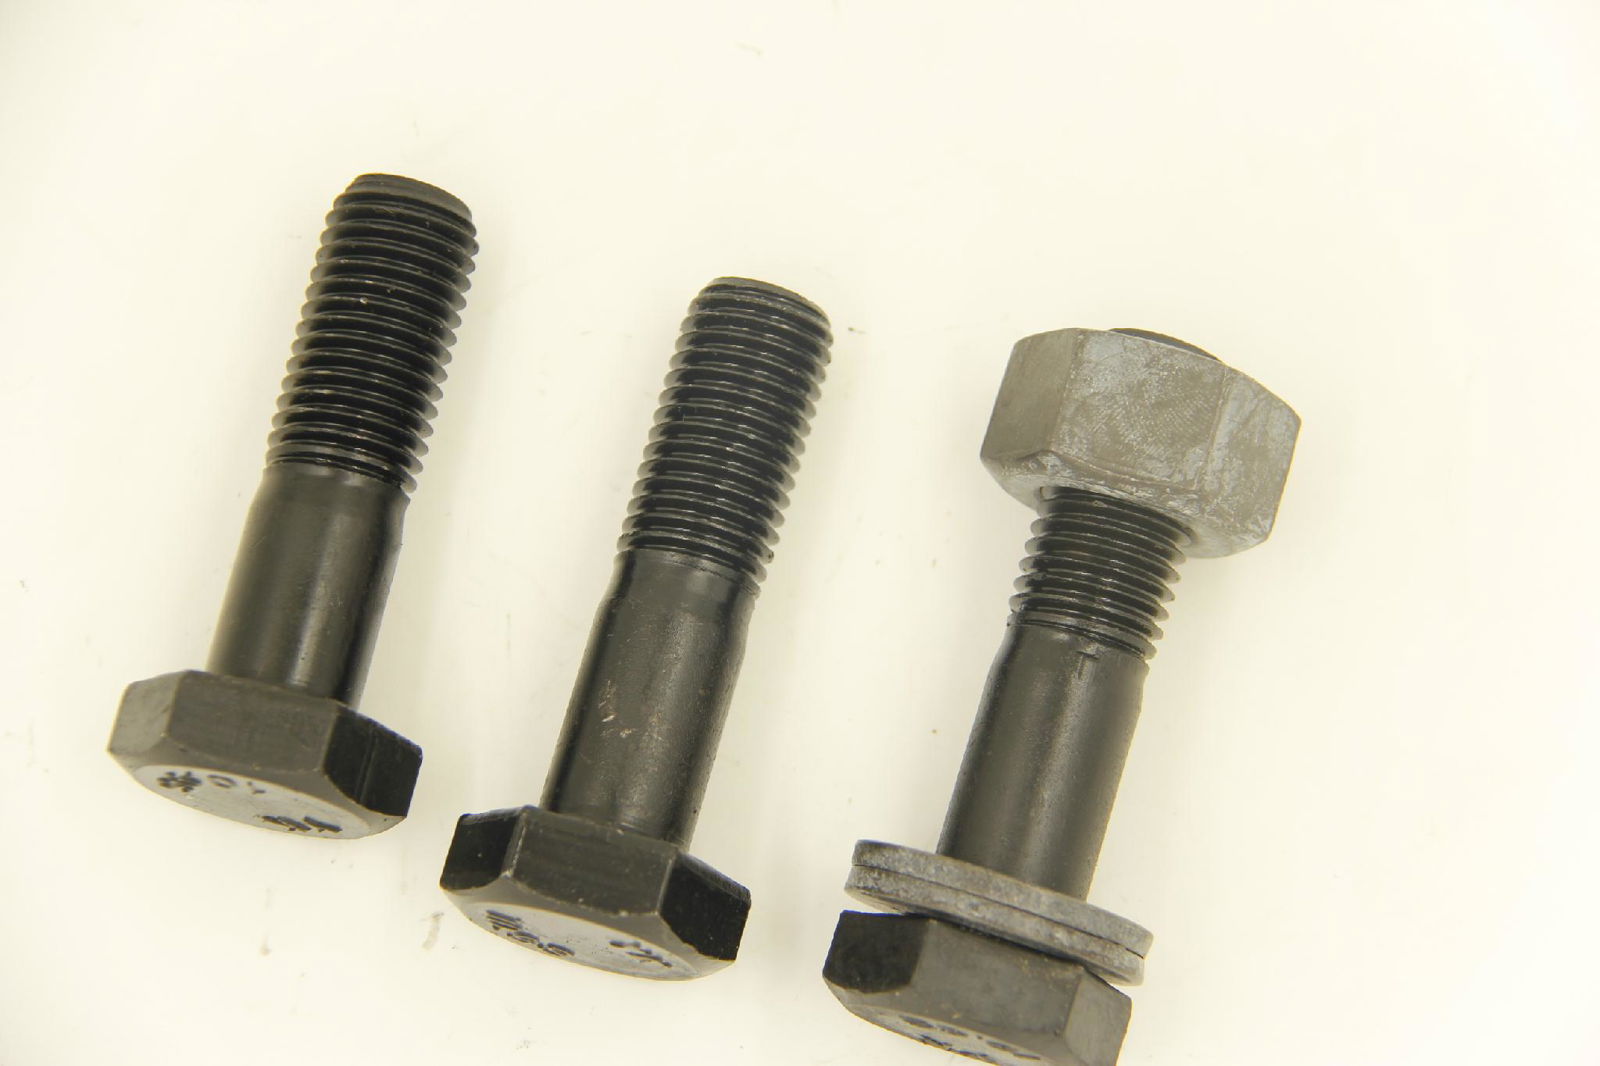 Hexagon head bolt and nut with washer